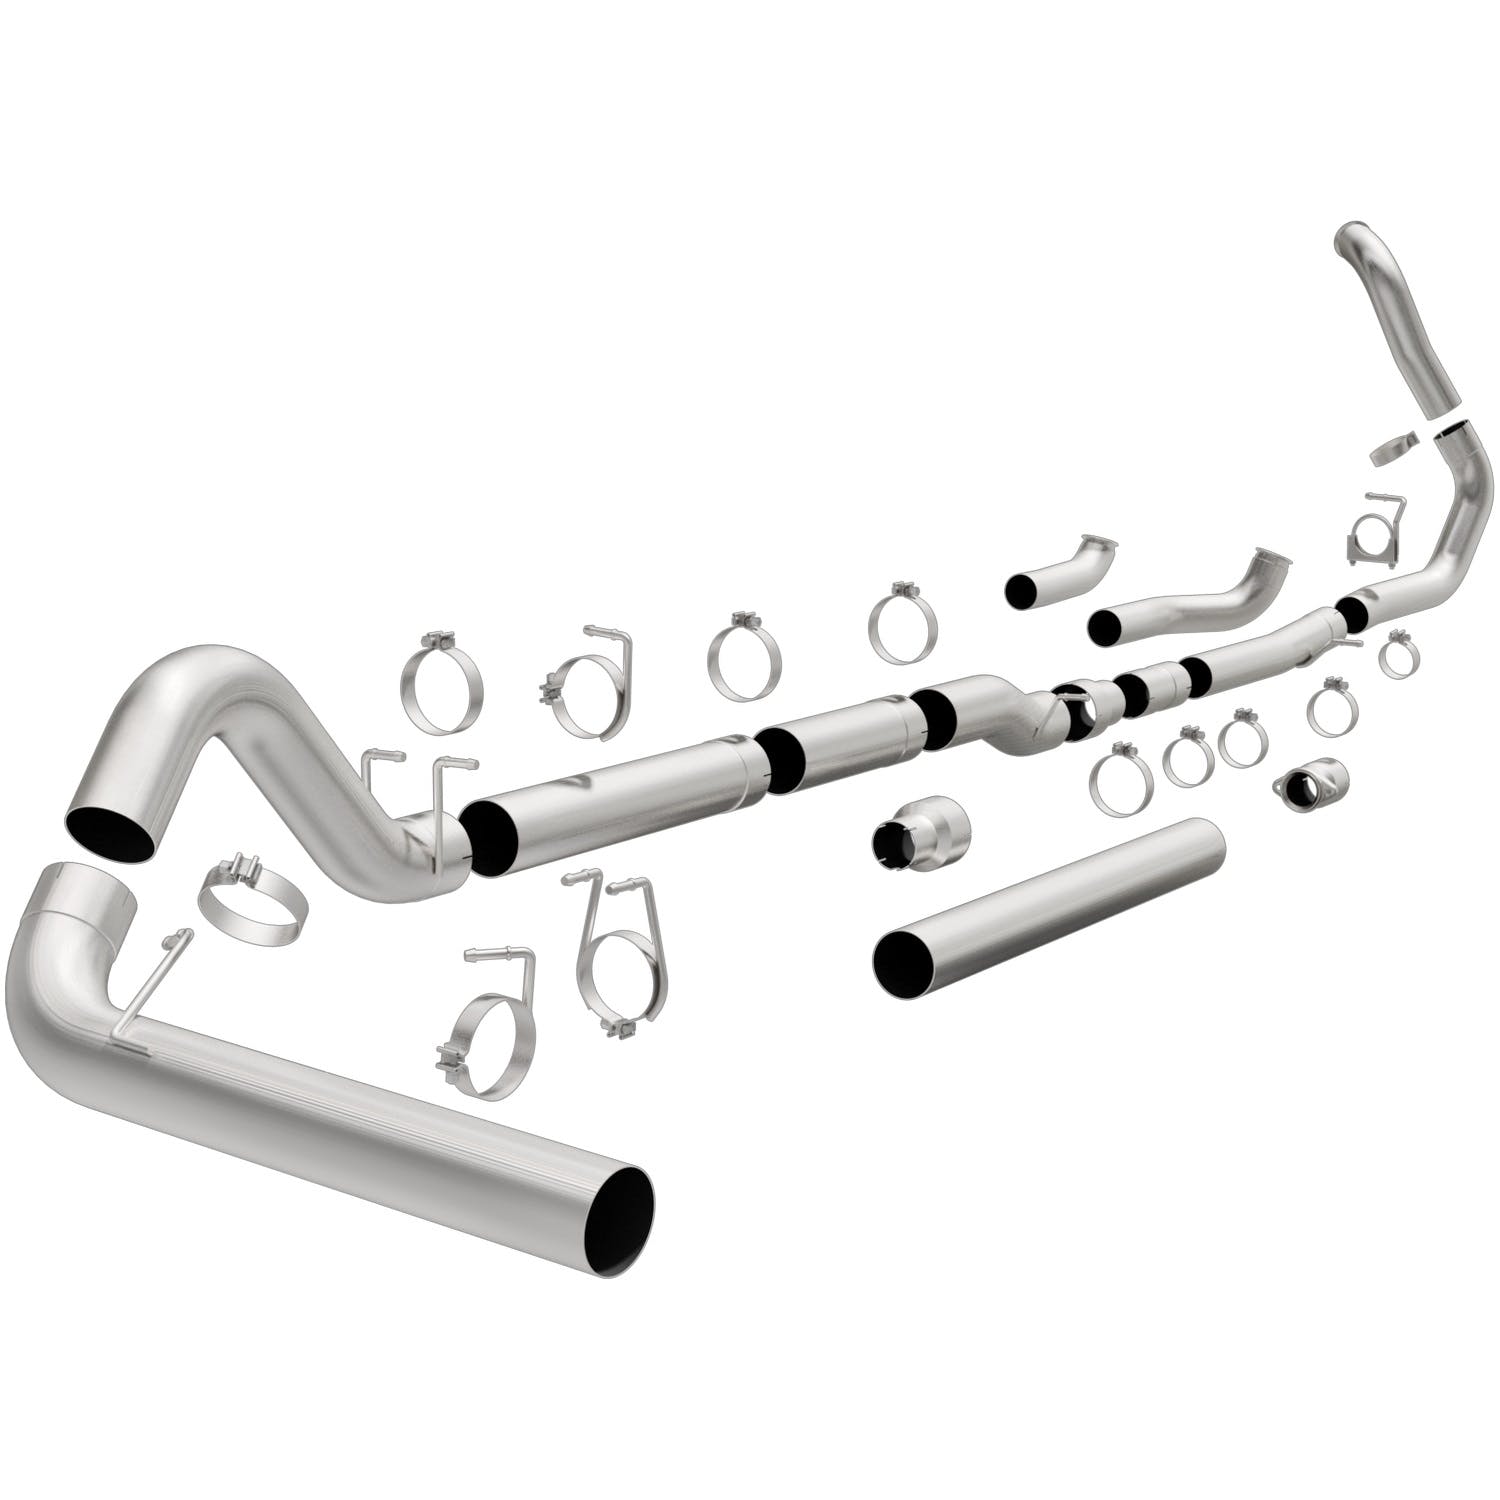 MagnaFlow Exhaust Products 18941 Cat Back-Diesel Aluminized